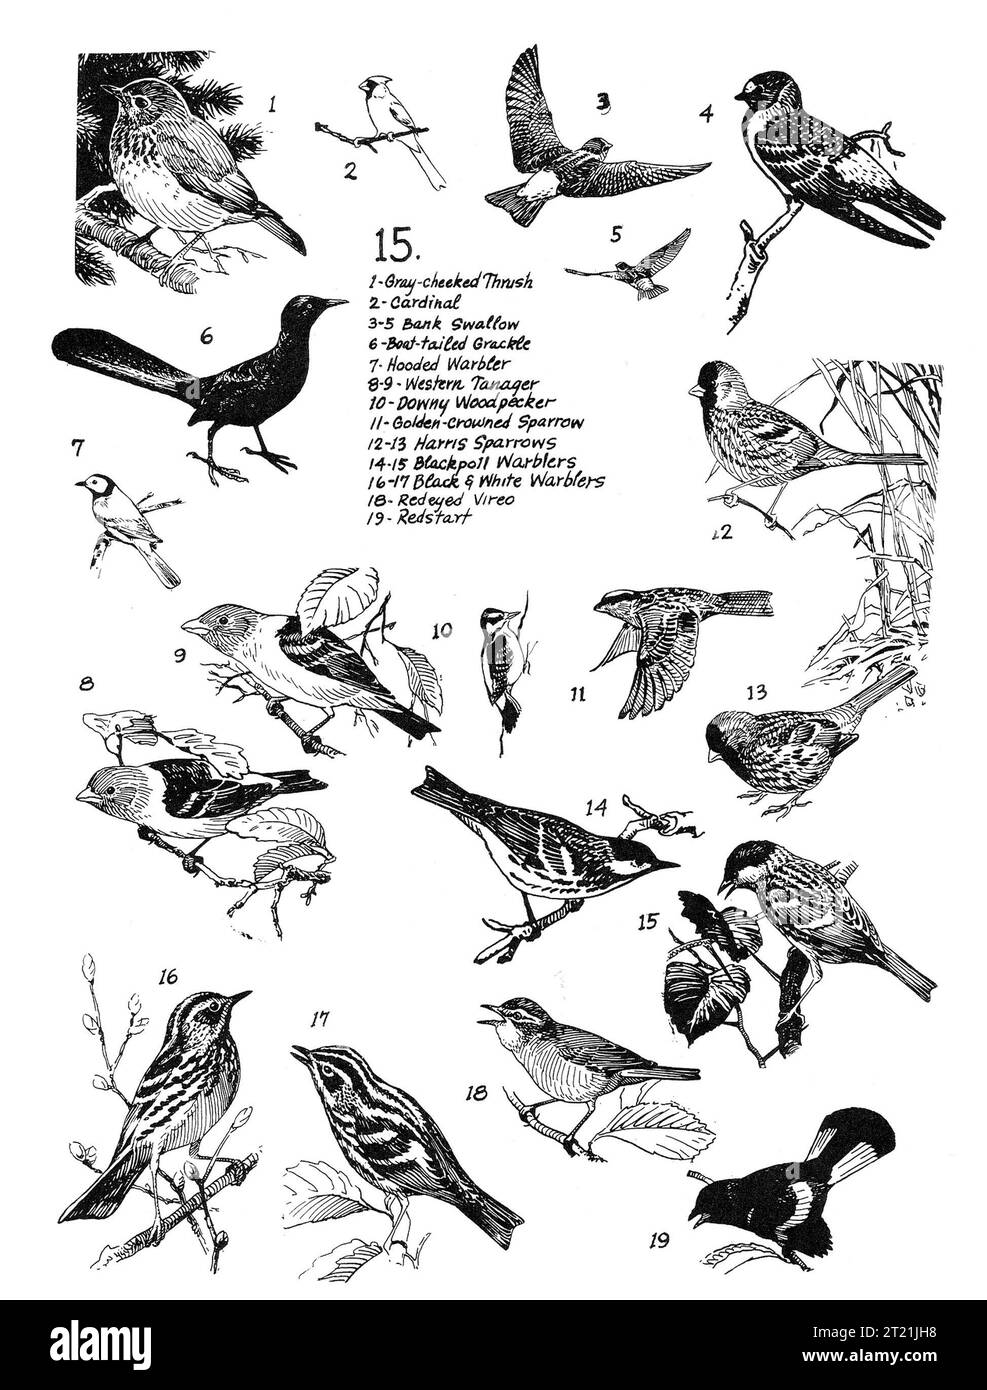 National wildlife artist Bob Hines (1912 - 1994) bird illustrations including gray-cheeked thrush; cardinal; bank swallow; boat-tailed grackle; hooded warbler; western tanager; downy woodpecker; golden-crowned sparrow; harris sparrows; blackpoll warblers. Subjects: Birds; Art; Songbirds; Illustrations; Perching birds.  . 1998 - 2011. Stock Photo